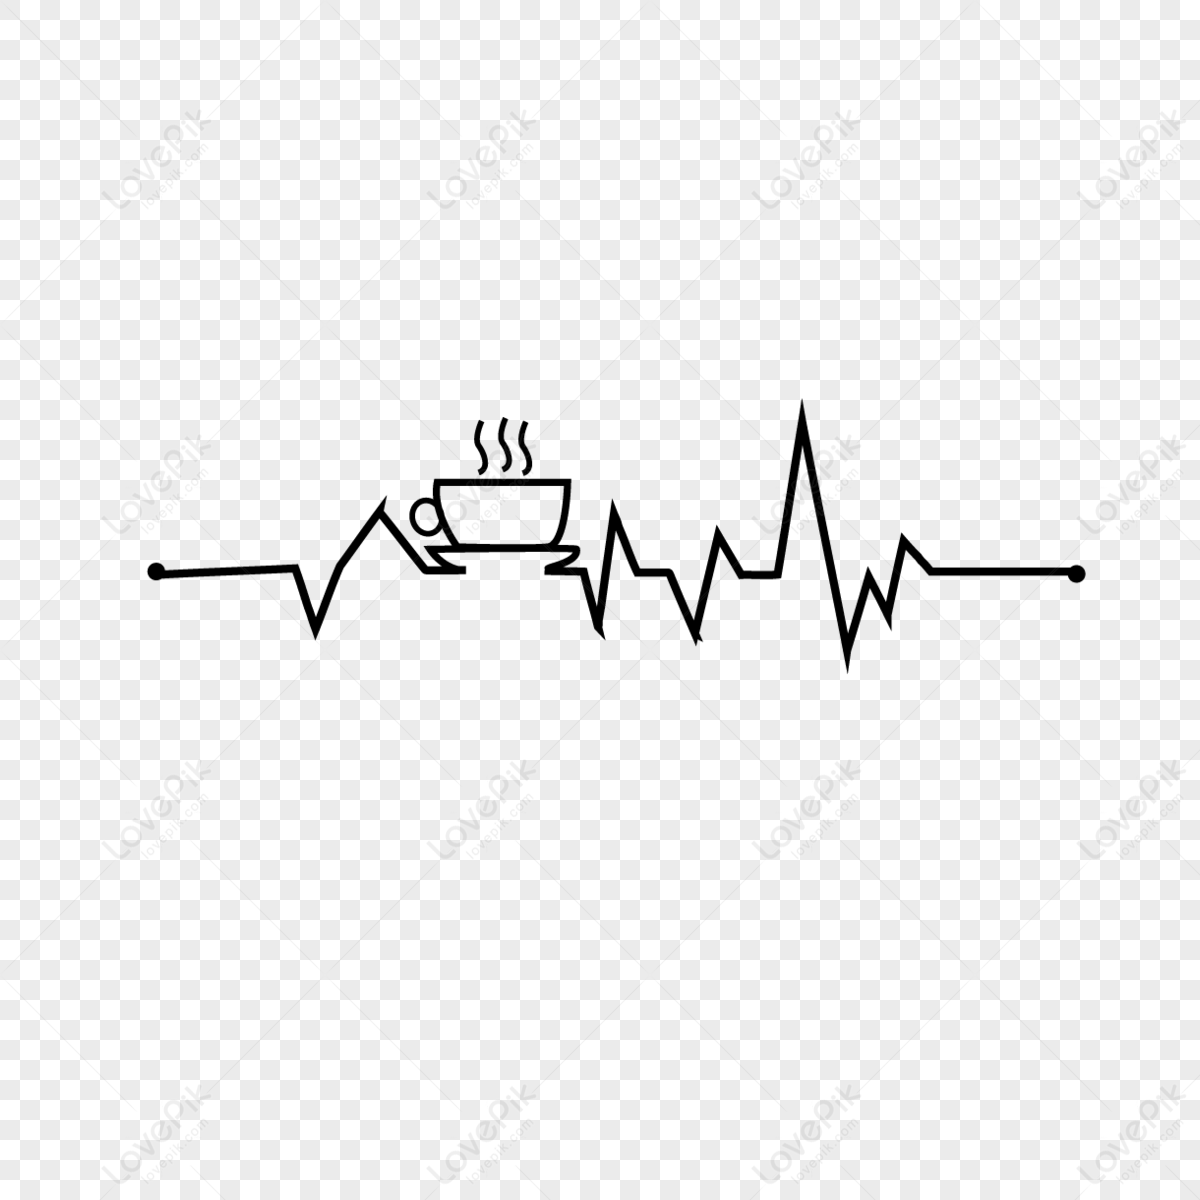 Heartbeat Tattoos - Cool Designs gift ideas for family & friends 